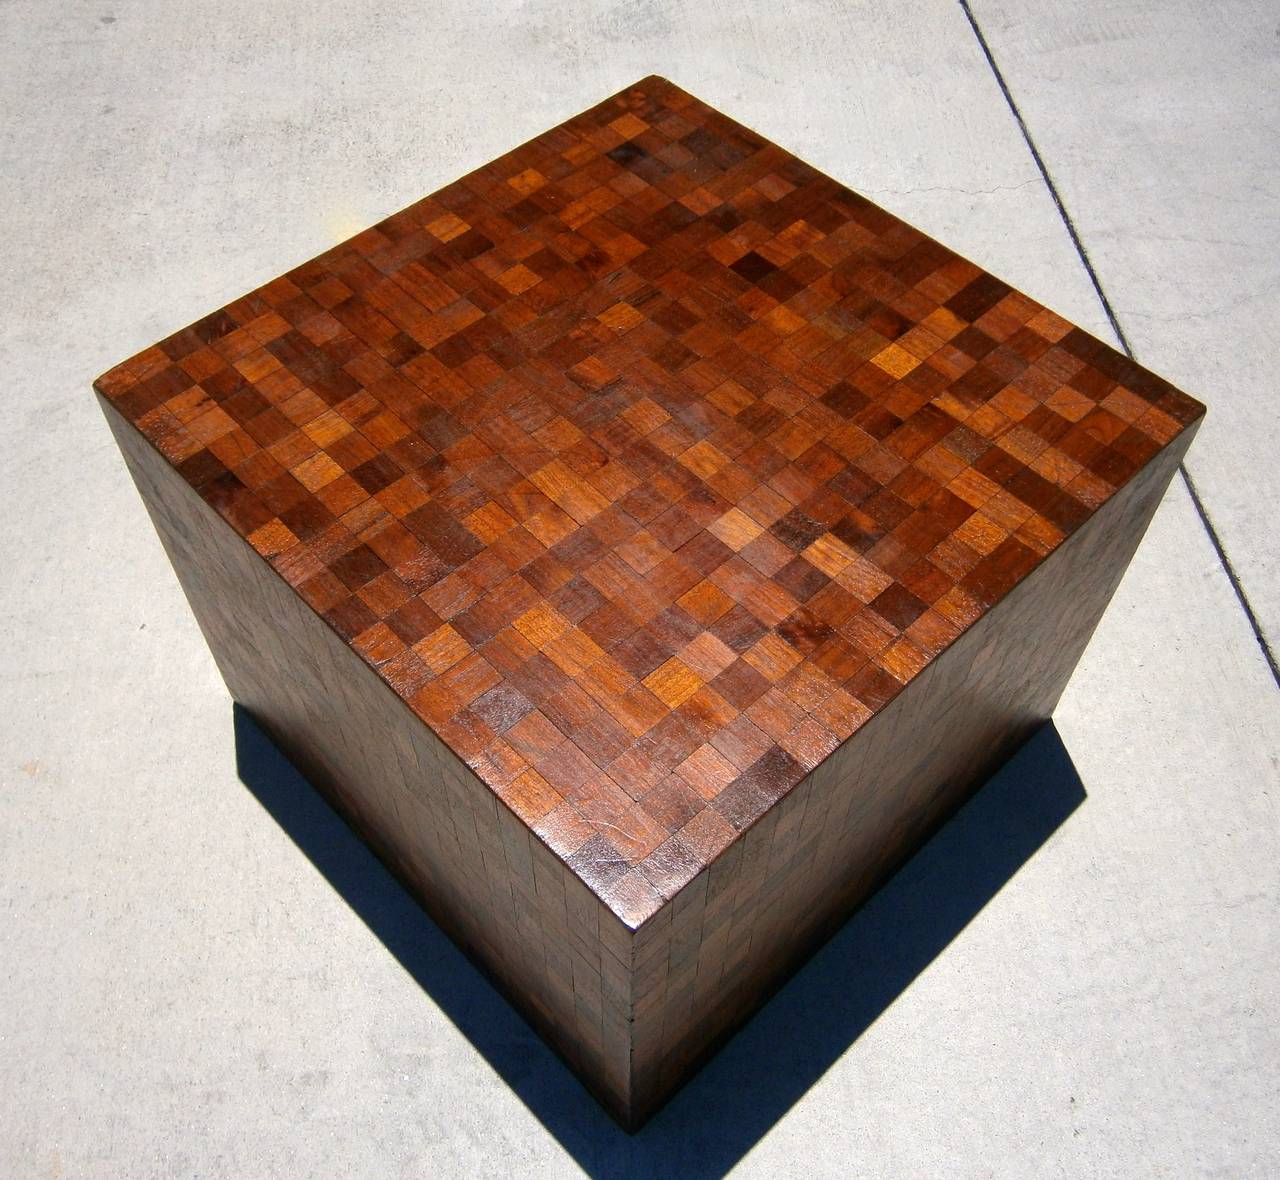 This hand-made cube table is covered with hundreds of individual squares of .25